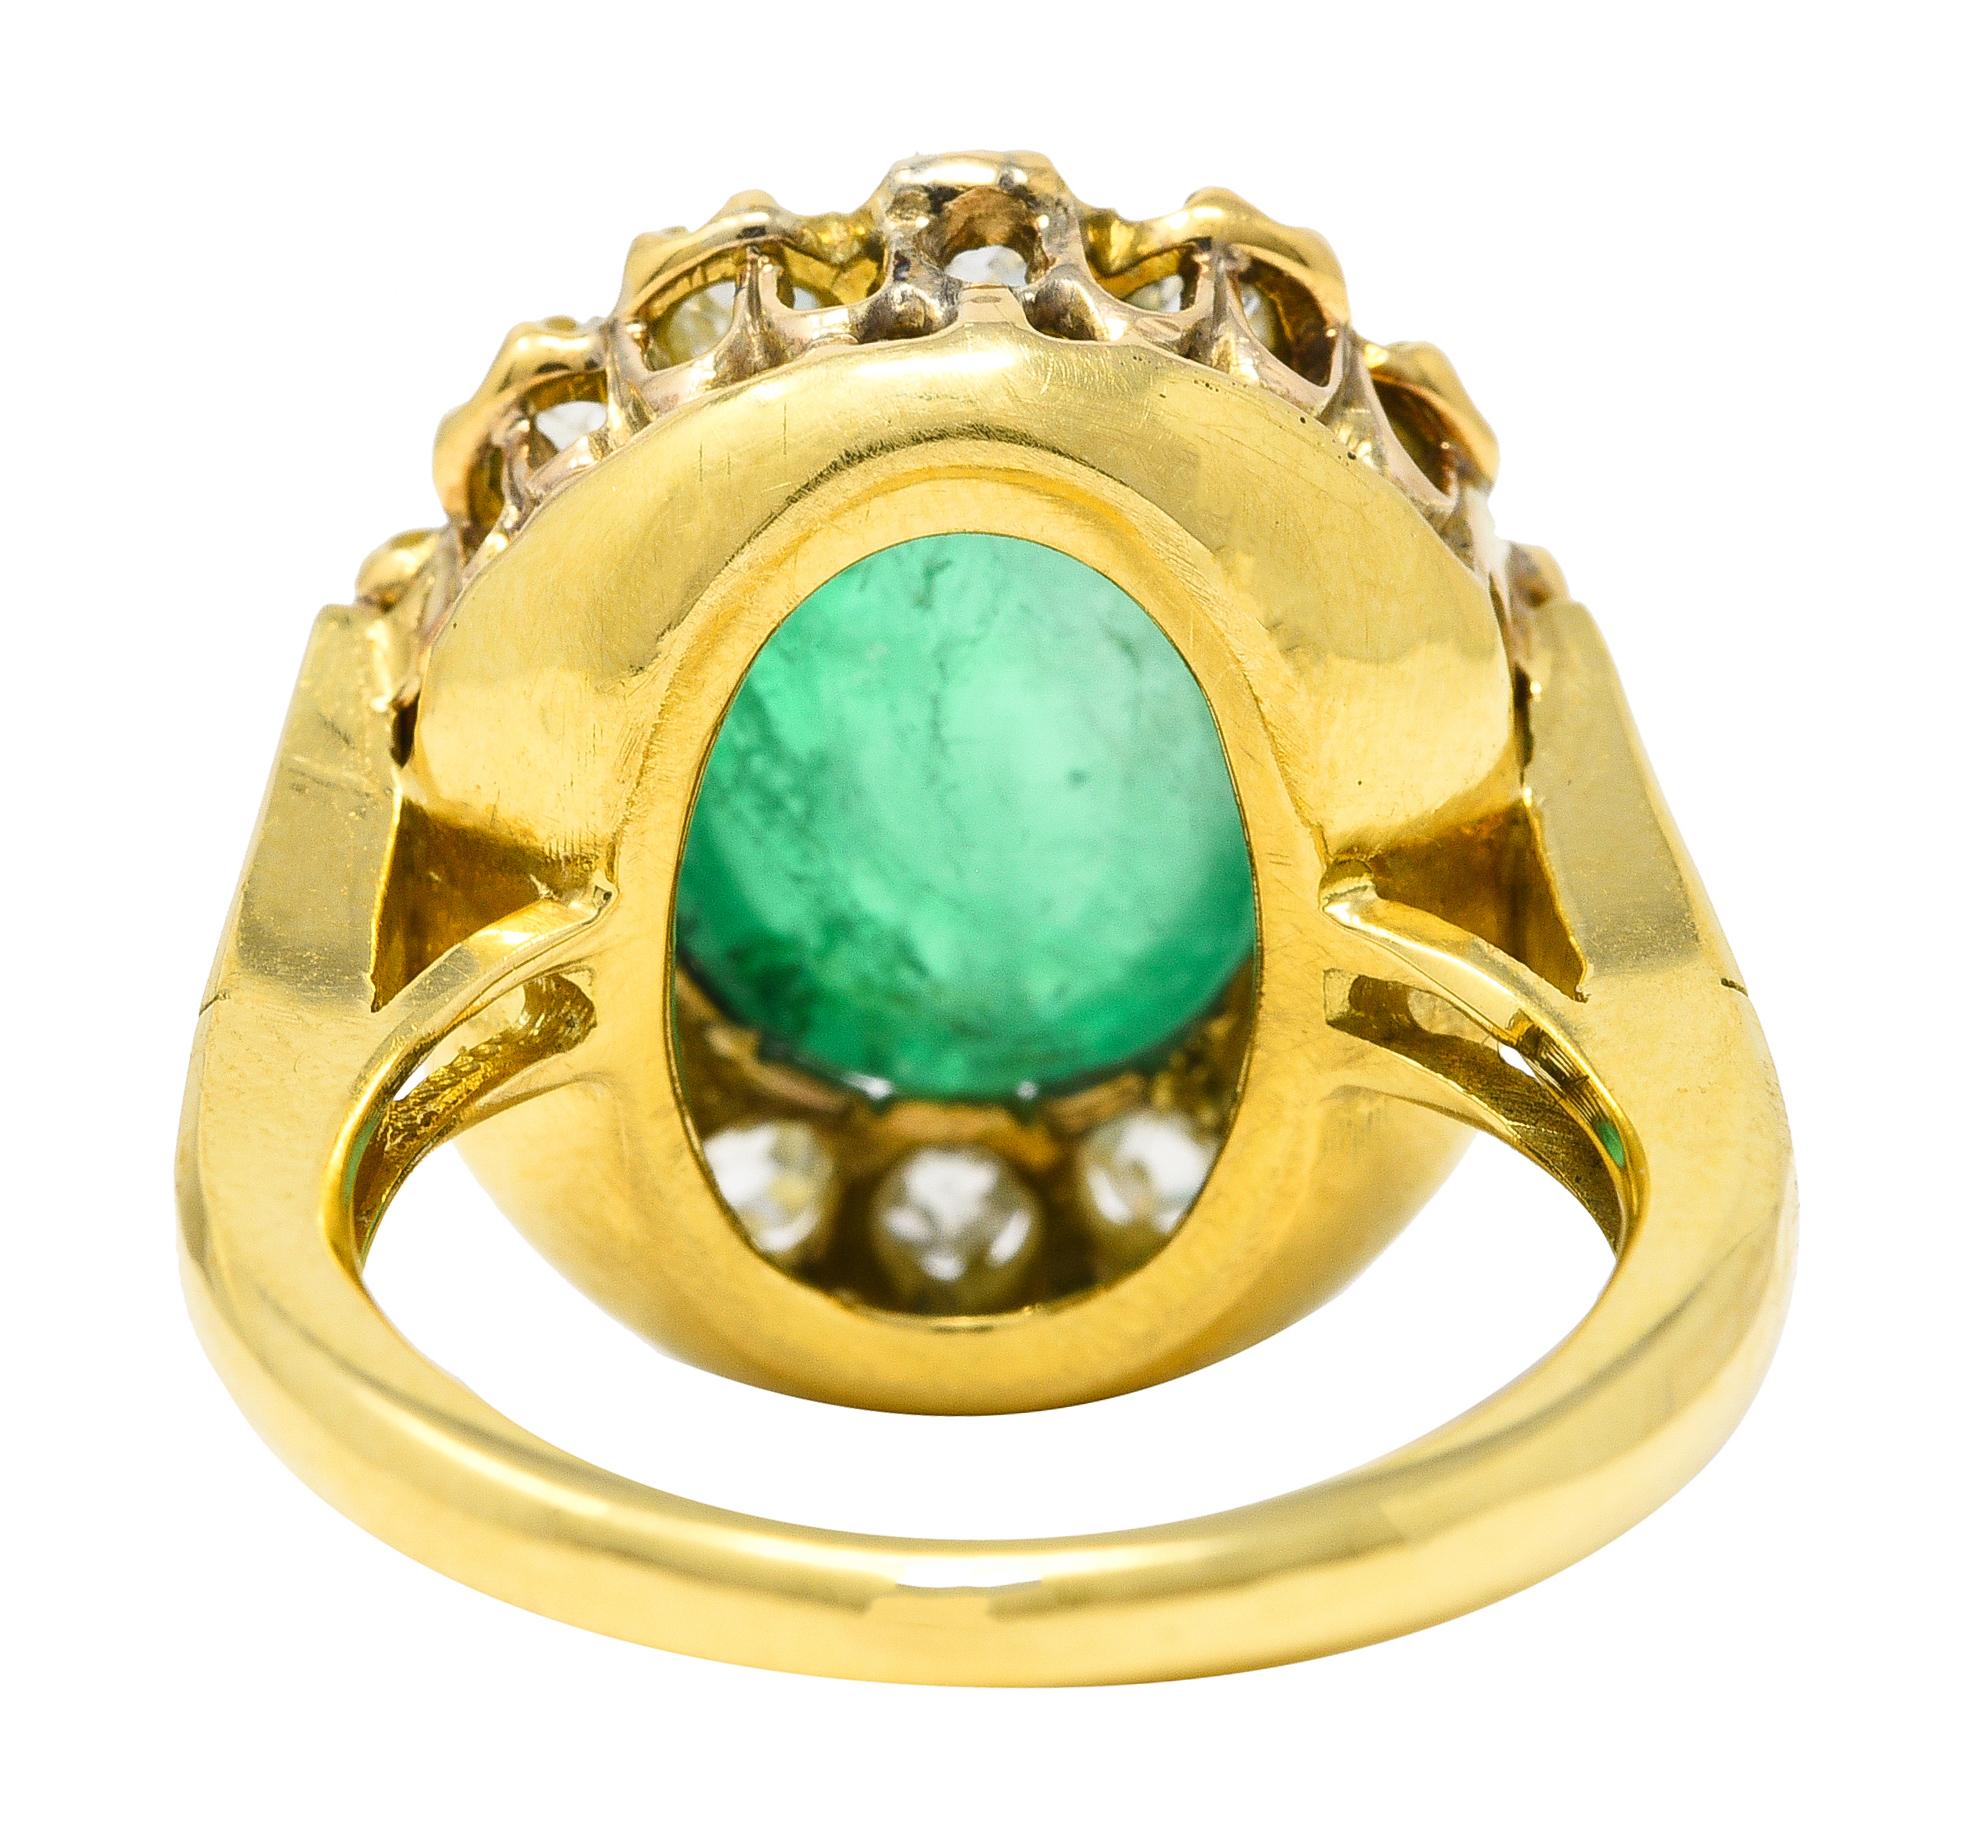 Vintage Egyptian Revival 7.80 Carats Carved Emerald Diamond 18 Karat Ring In Excellent Condition For Sale In Philadelphia, PA